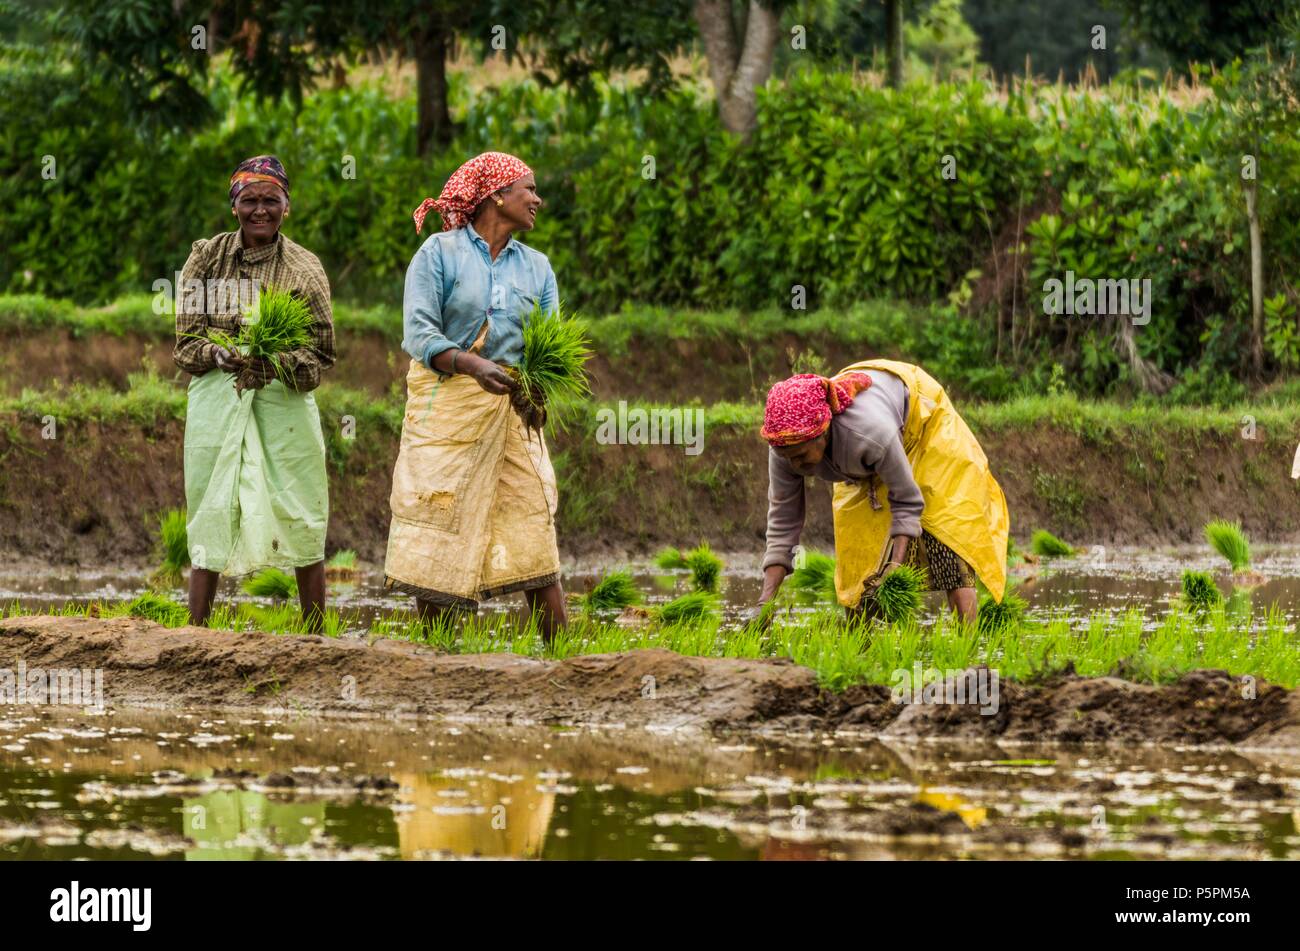 Women in Agriculture Stock Photo